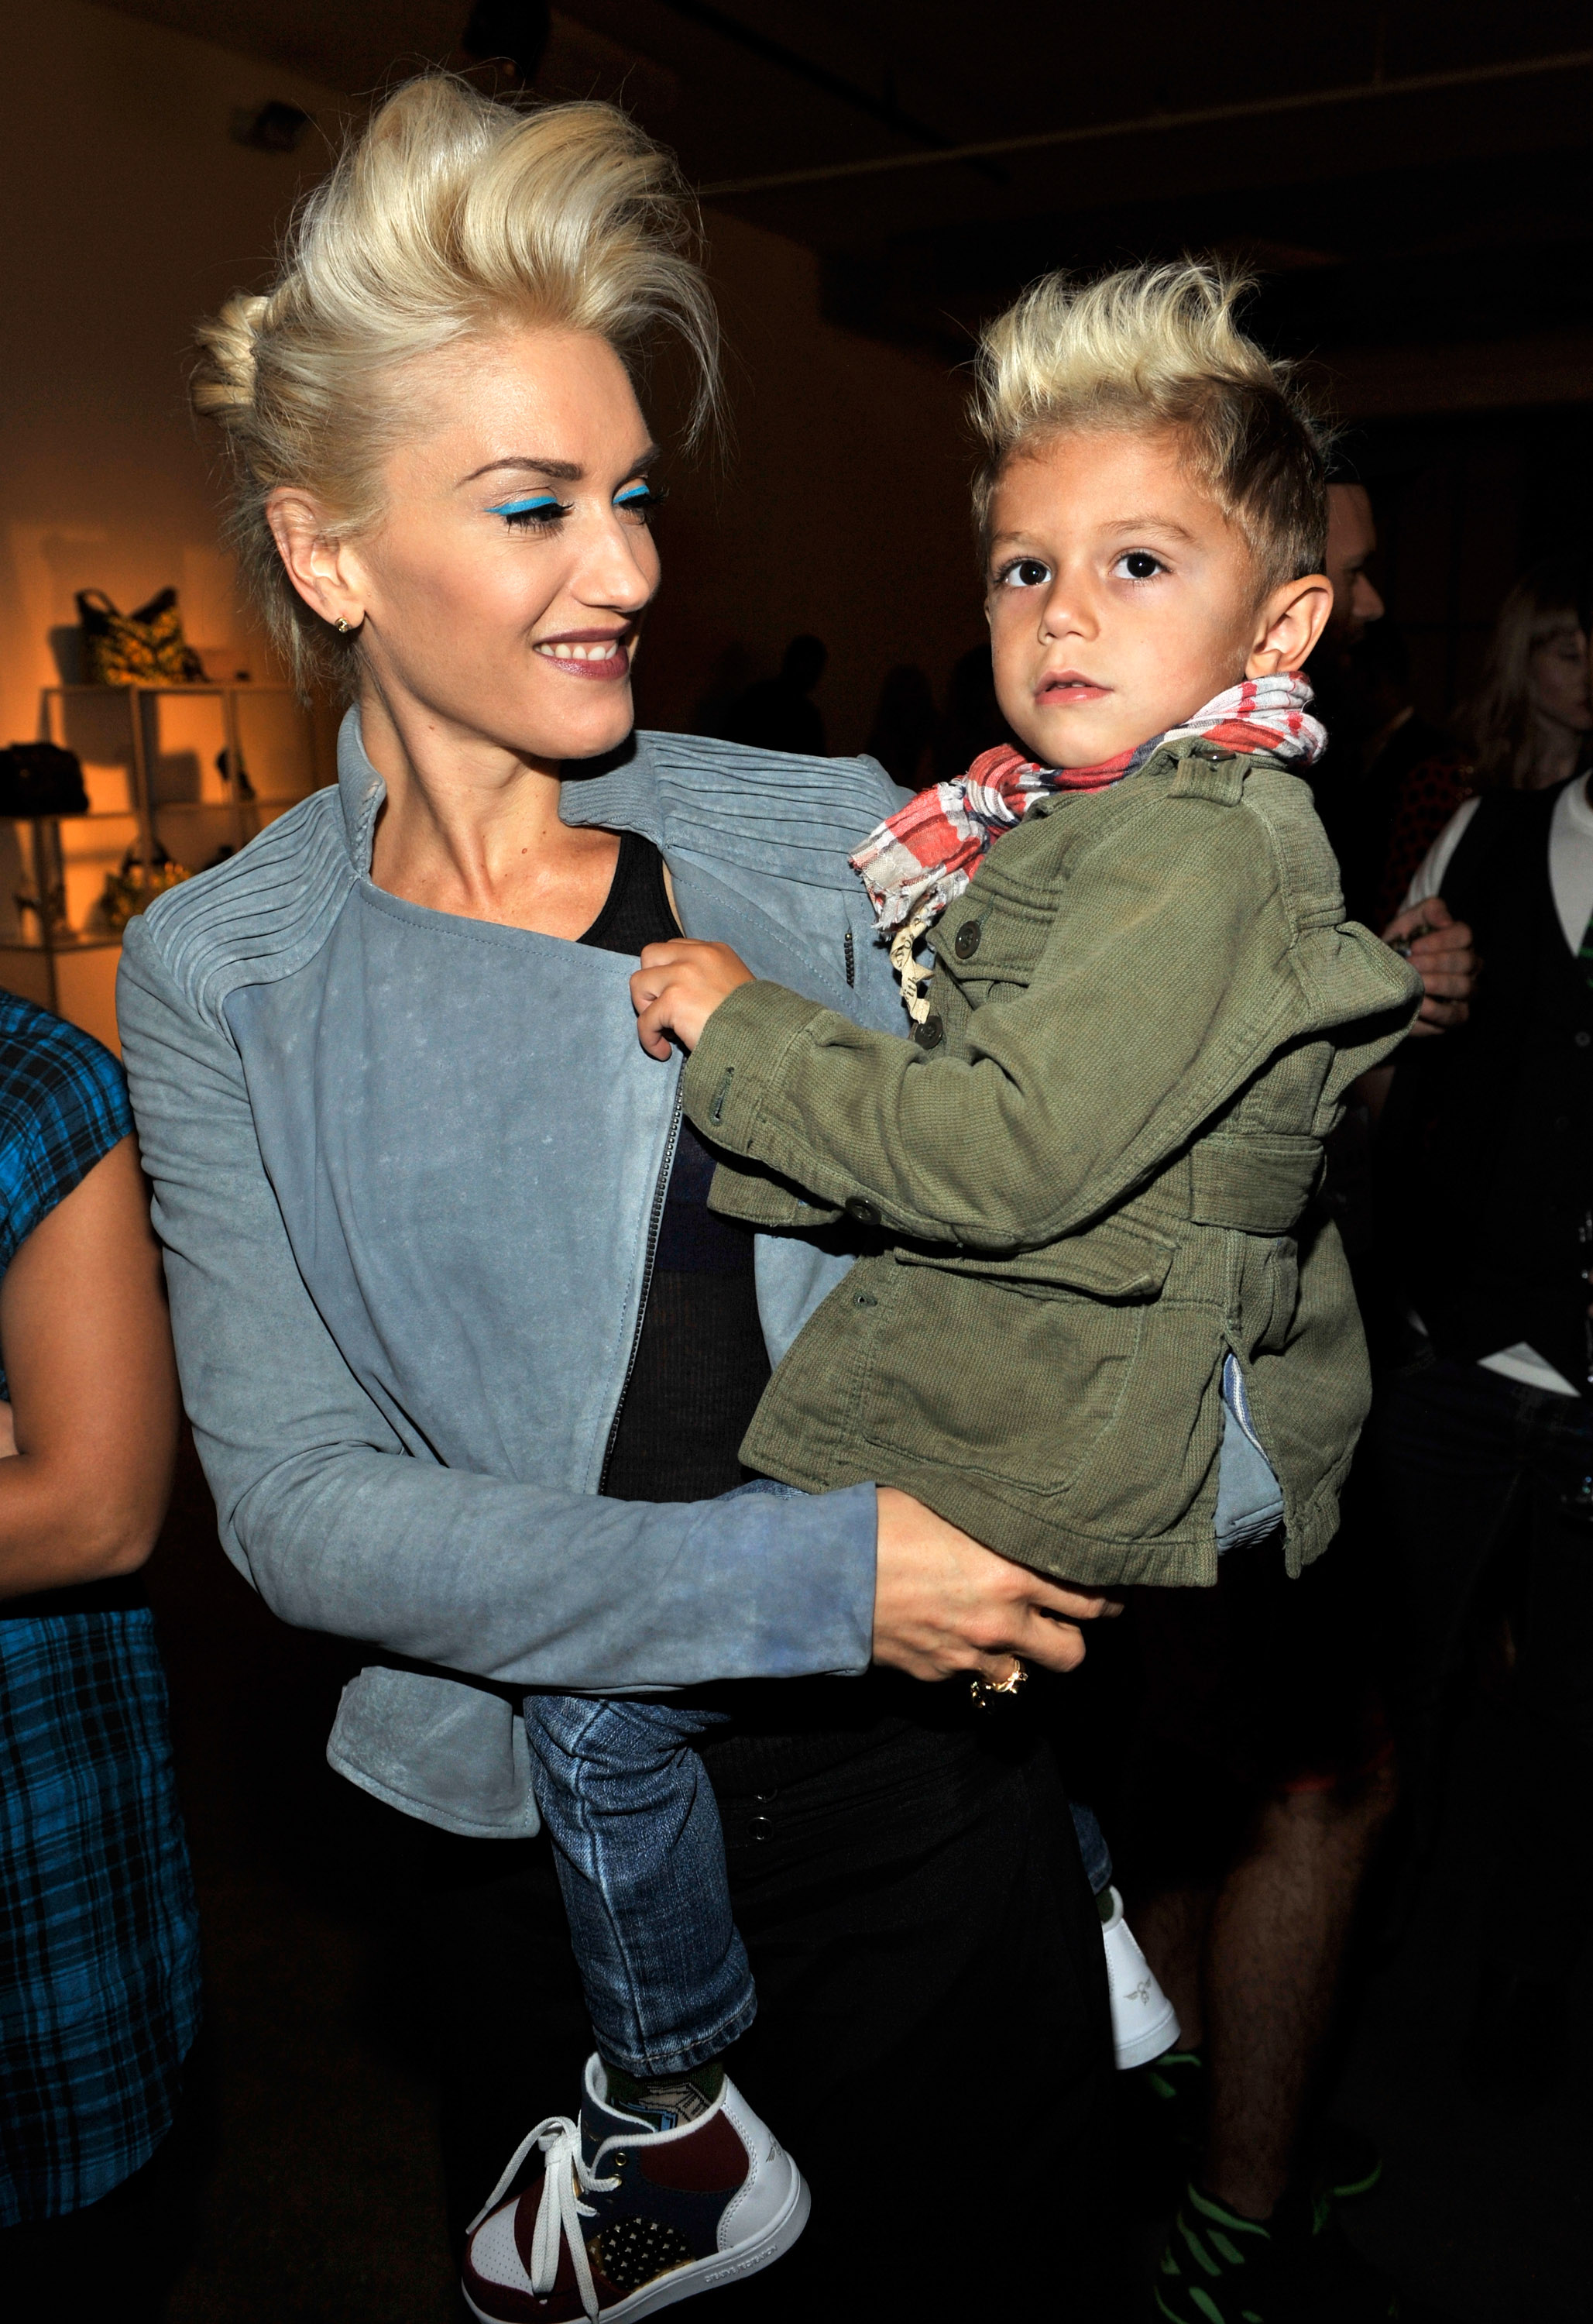 Gwen Stefani and her son Kingston Rossdale backstage at the L.A.M.B Fashion Presentation at the MAC and Milk Studio on September 10, 2009 in New York City | Source: Getty Images